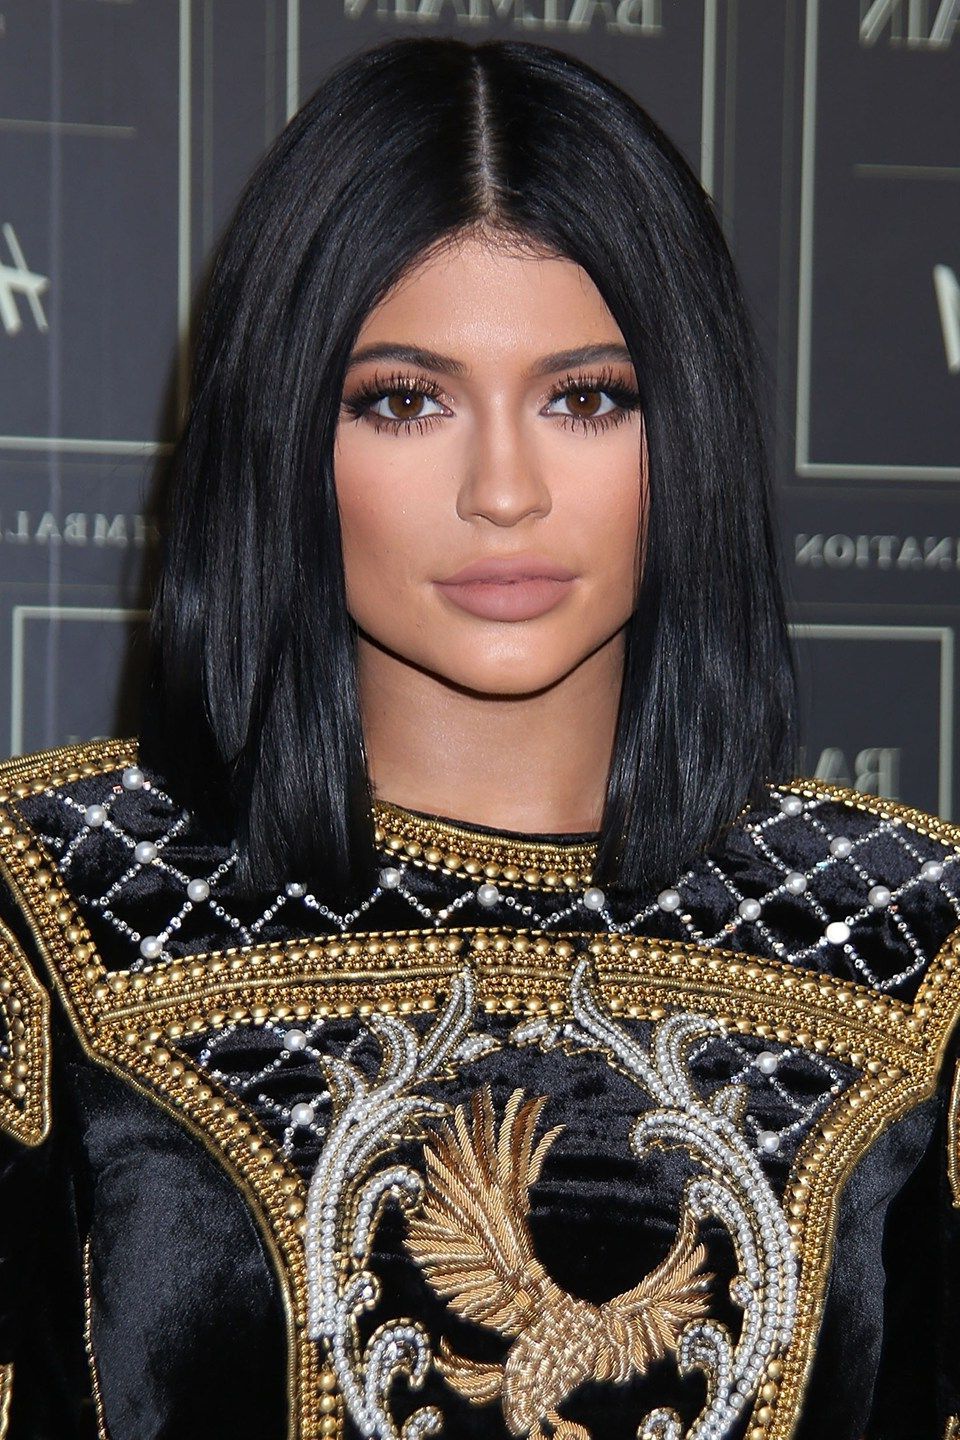 Kylie Jenner Reveals New Short Hairstyle Was A Wig | Kylie Intended For Kylie Jenner Short Haircuts (View 2 of 25)